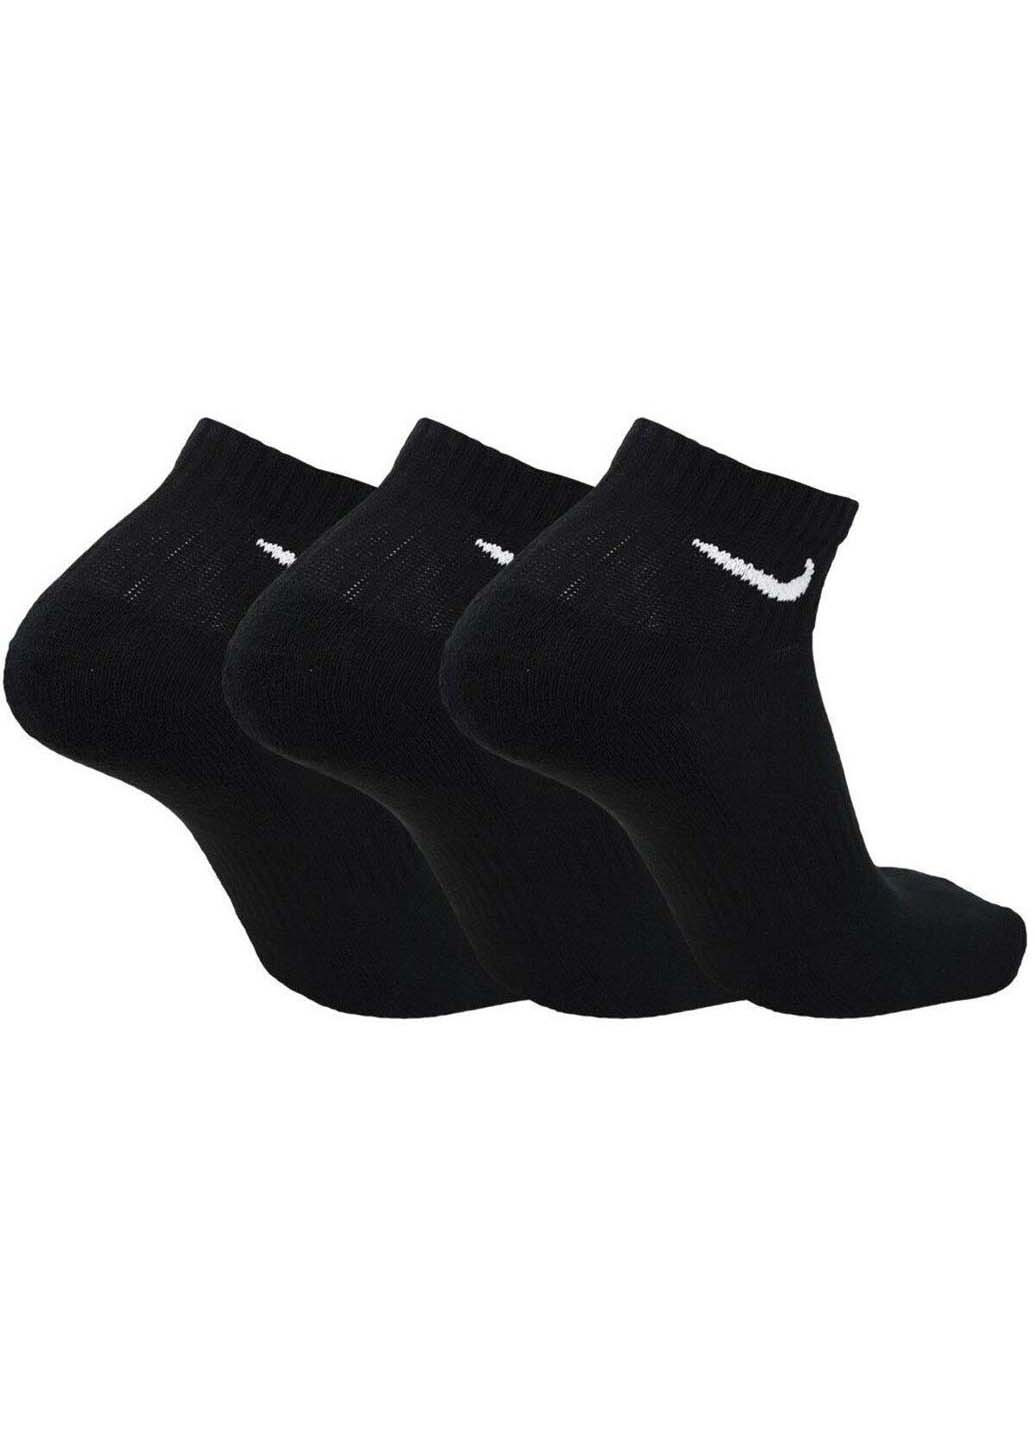 Носки Nike everyday cushion ankle 3-pack (255920542)